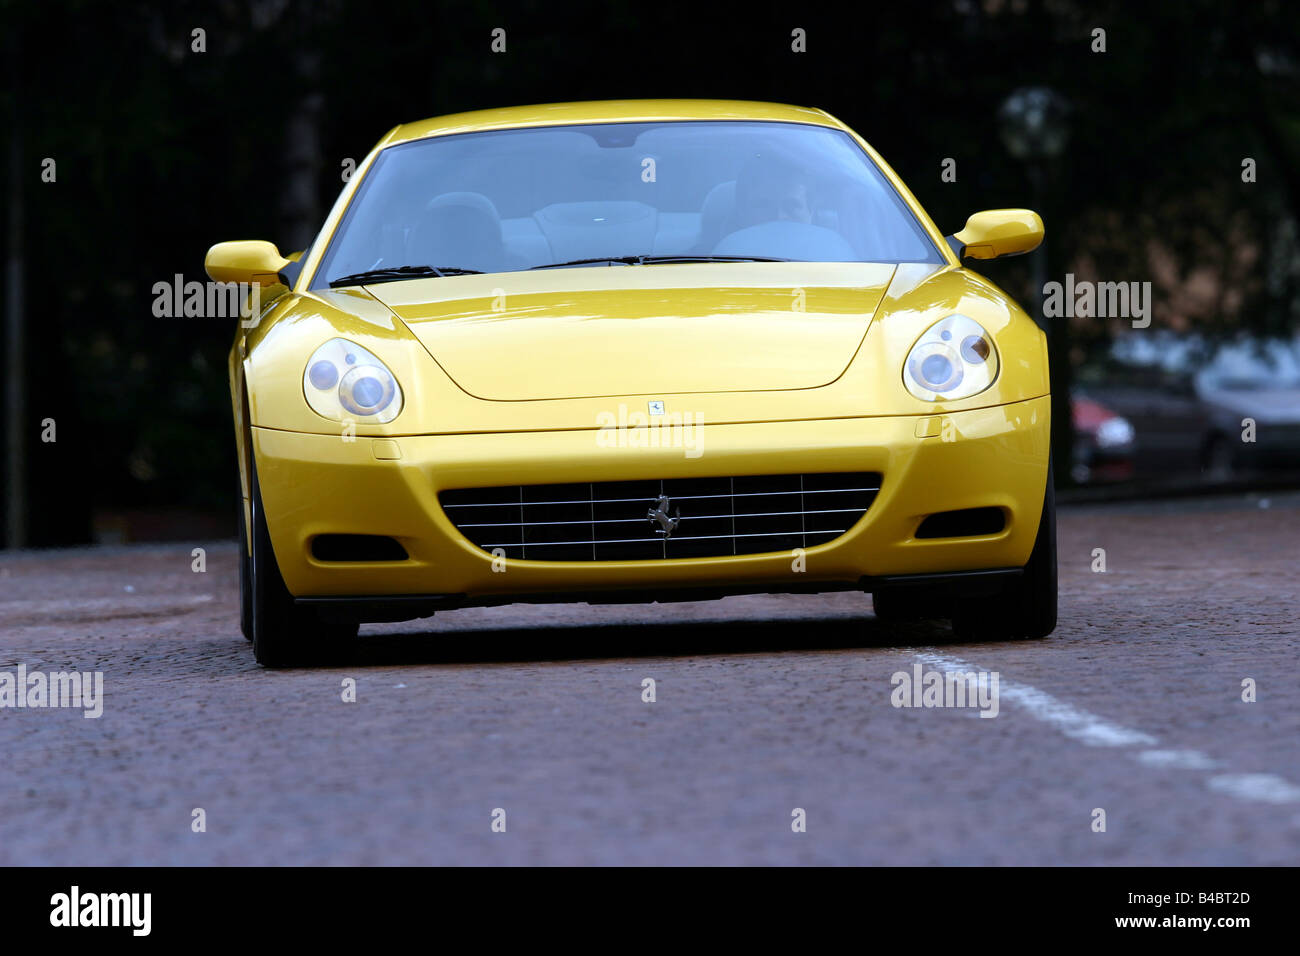 Car, Ferrari 612 Sapprox.lietti, roadster, model year 2004-, coupe/Coupe, yellow, driving, frontal view, country road, photograp Stock Photo